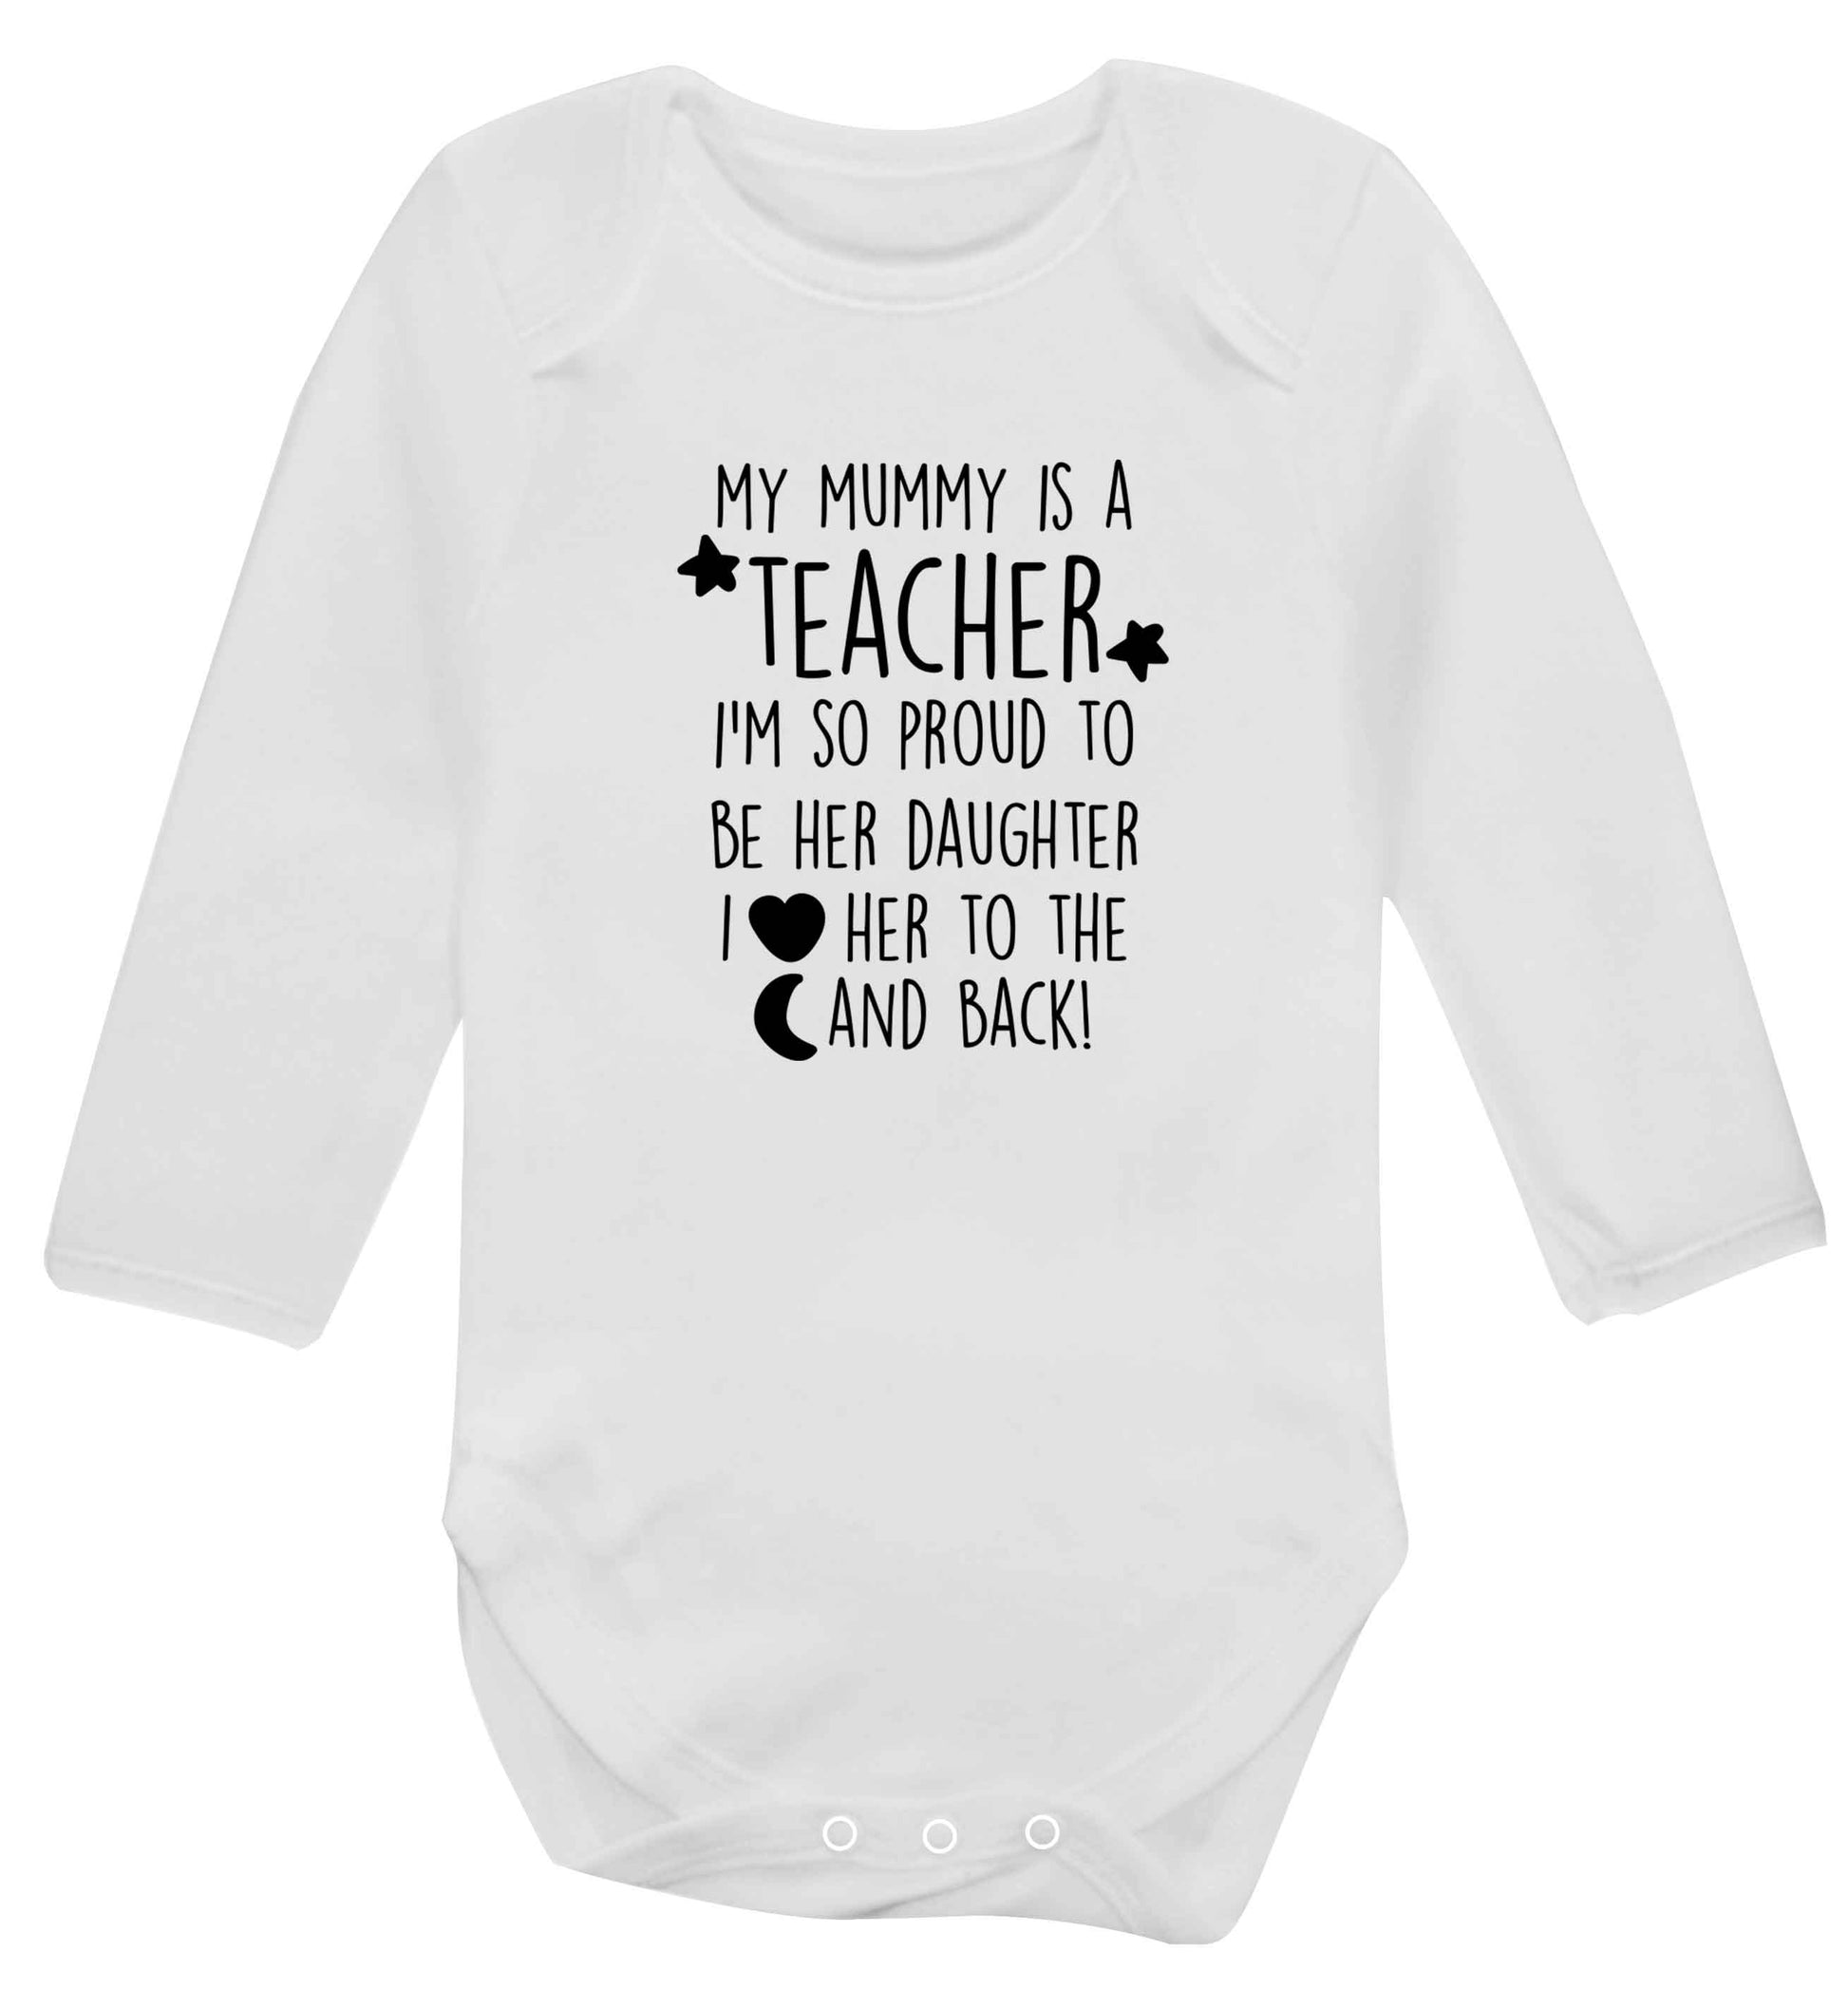 My mummy is a teacher I'm so proud to be her daughter I love her to the moon and back baby vest long sleeved white 6-12 months